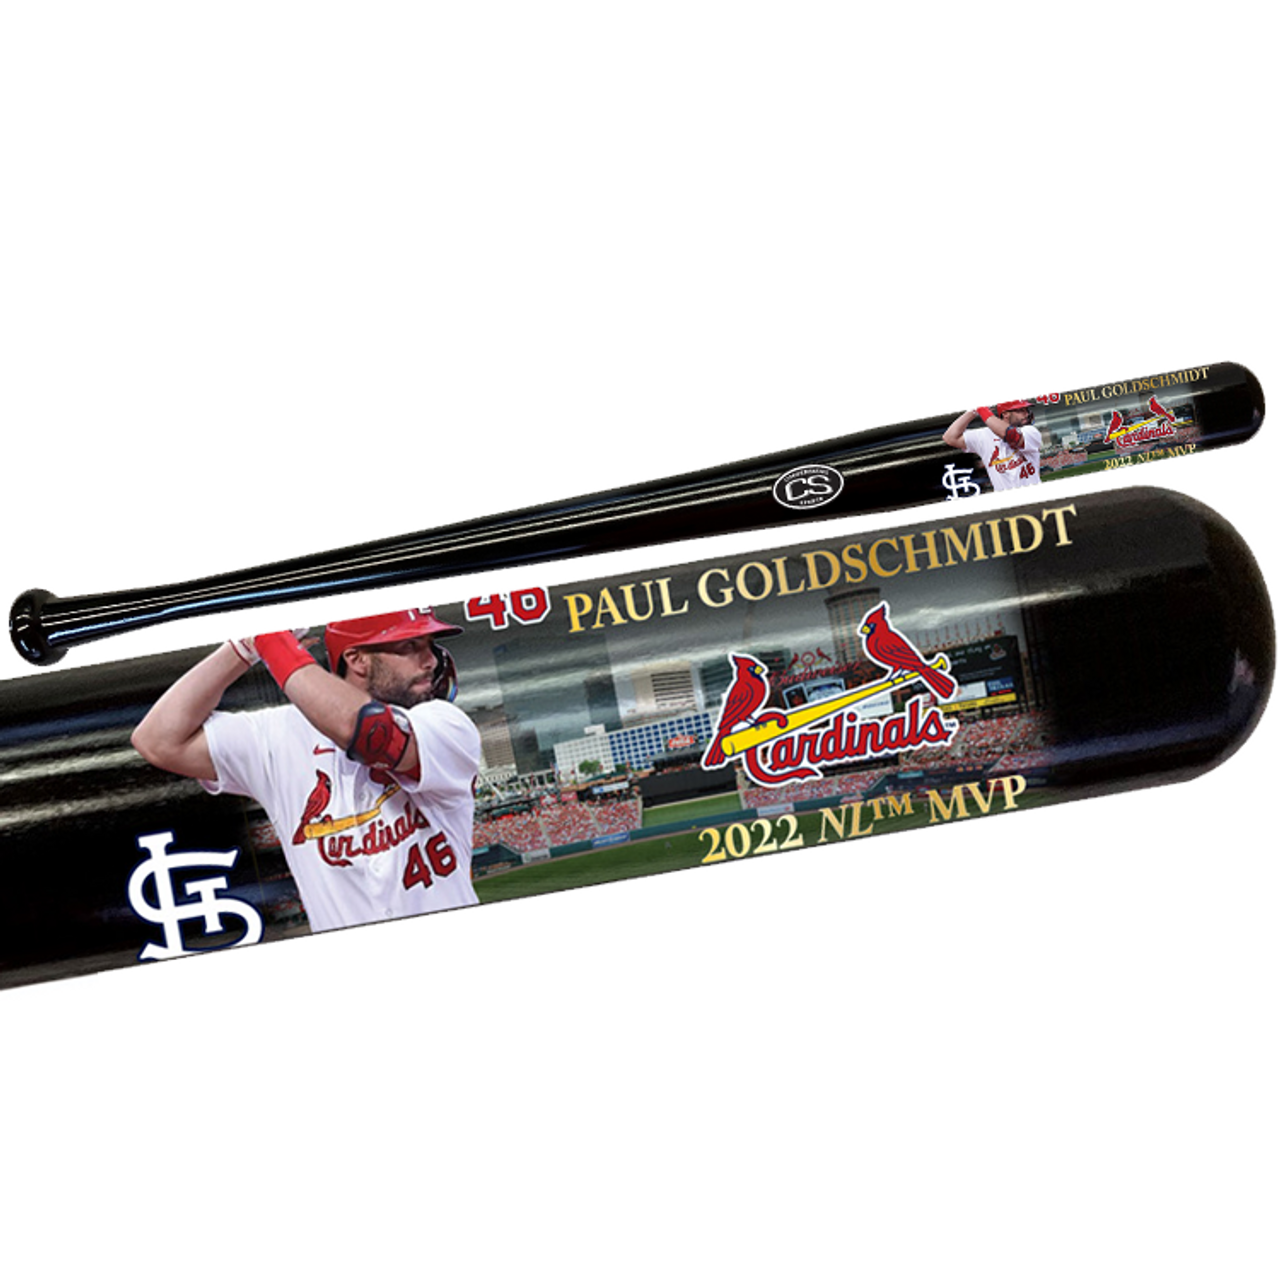 Paul Goldschmidt already has a bat in Cooperstown from May 24